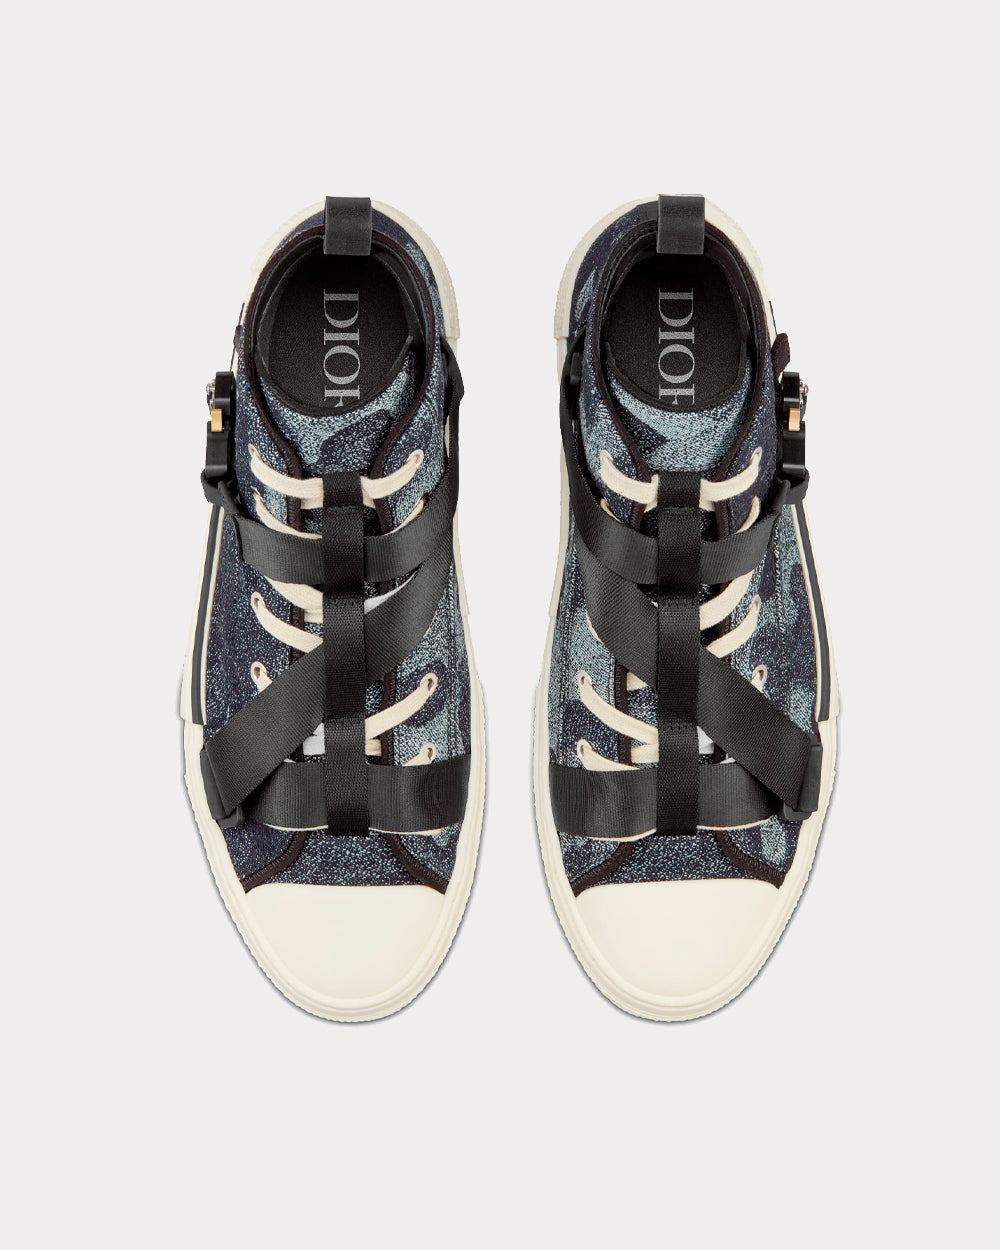 Dior x Peter Doig - B23 Denim Camouflage Jacquard High Top Sneakers